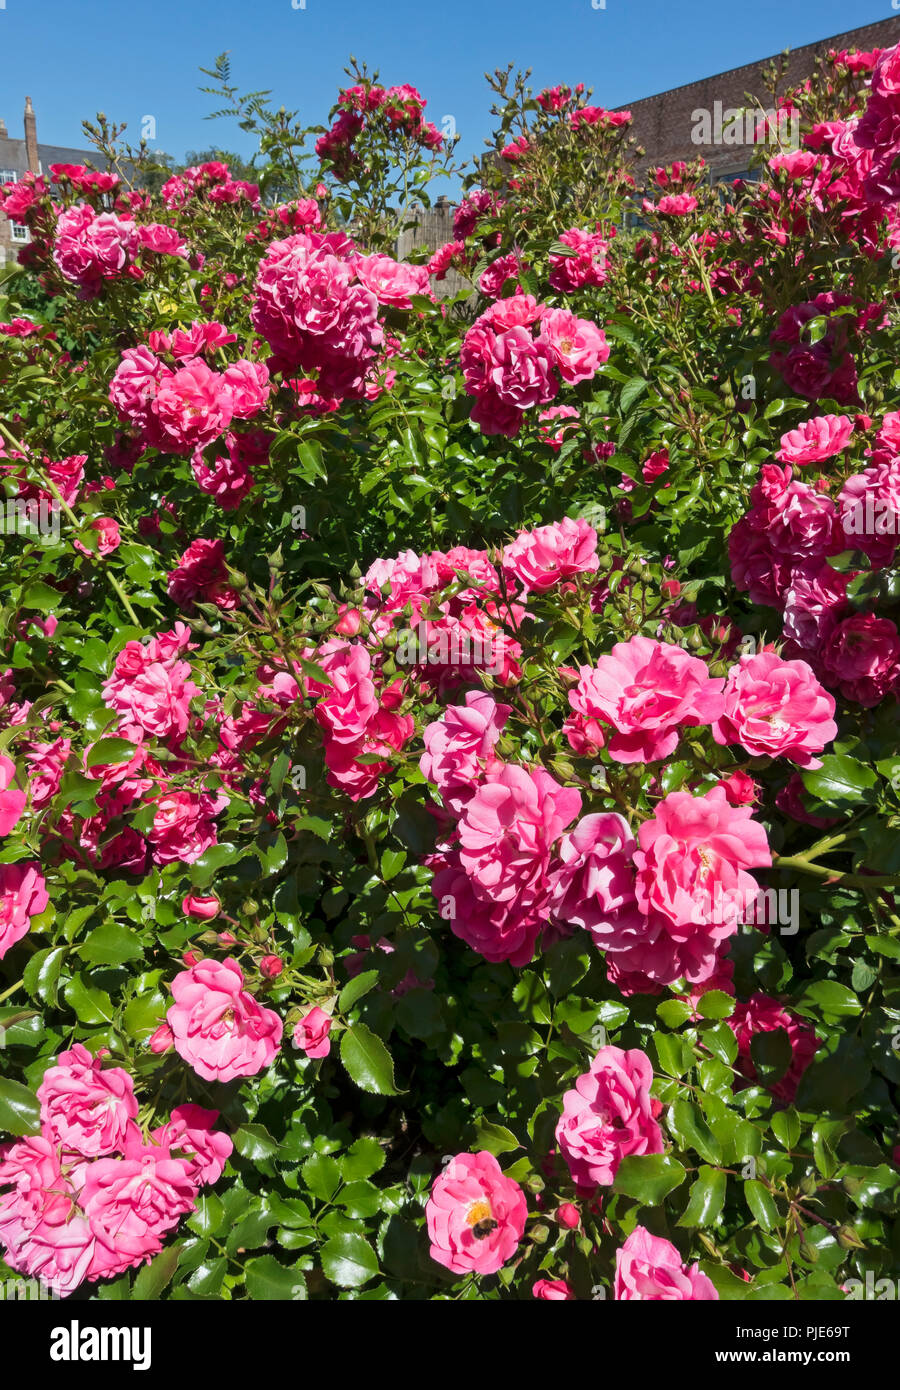 Flower Carpet Rose High Resolution Stock Photography And Images Alamy